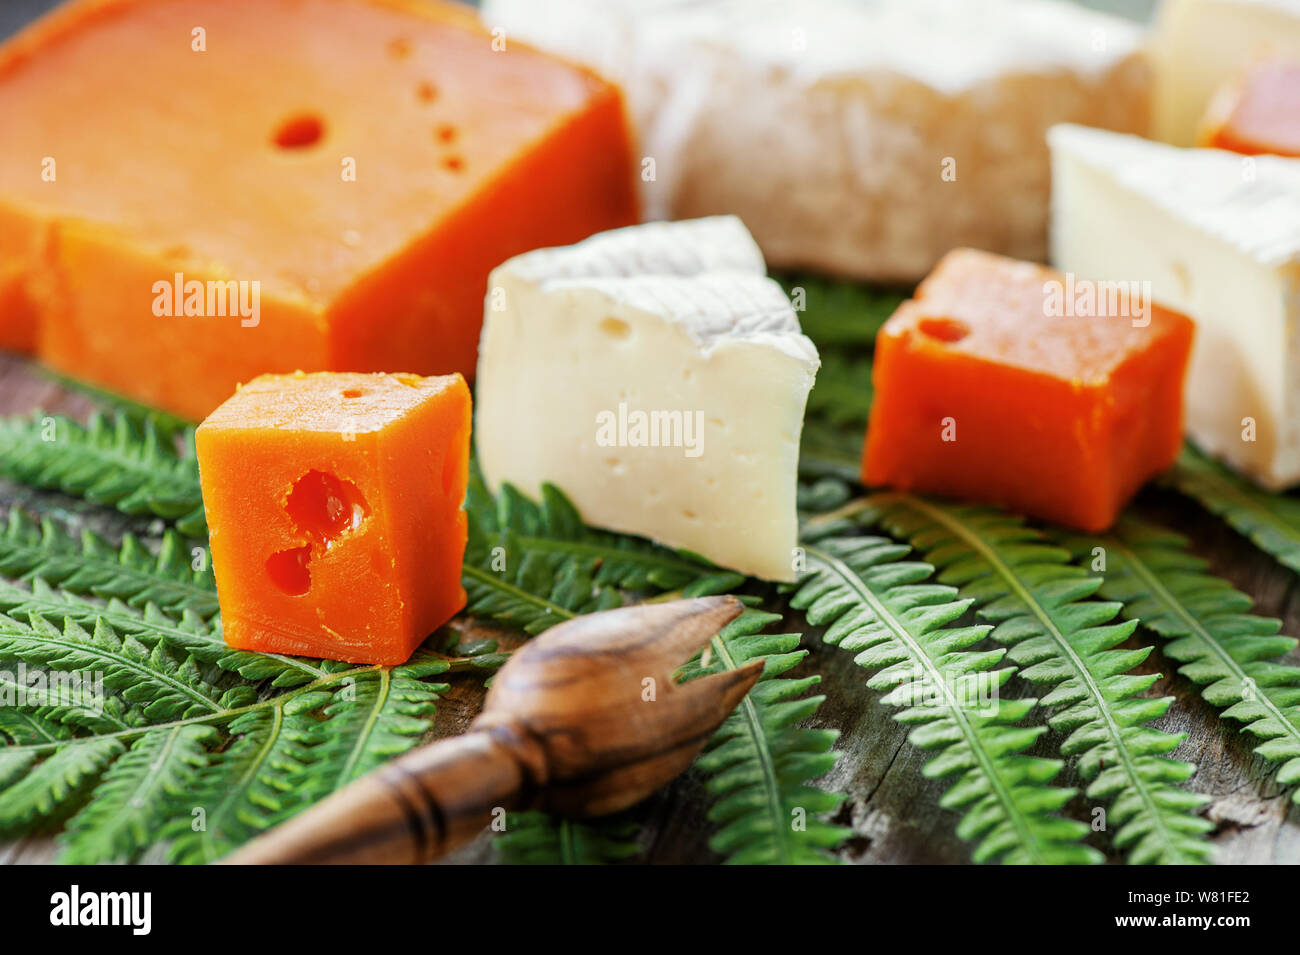 Delicacies, spicy cheeses. Red cheddar and Camembert brie , on a beautiful textured vegetable background is a savory snack for gourmets. Selective foc Stock Photo